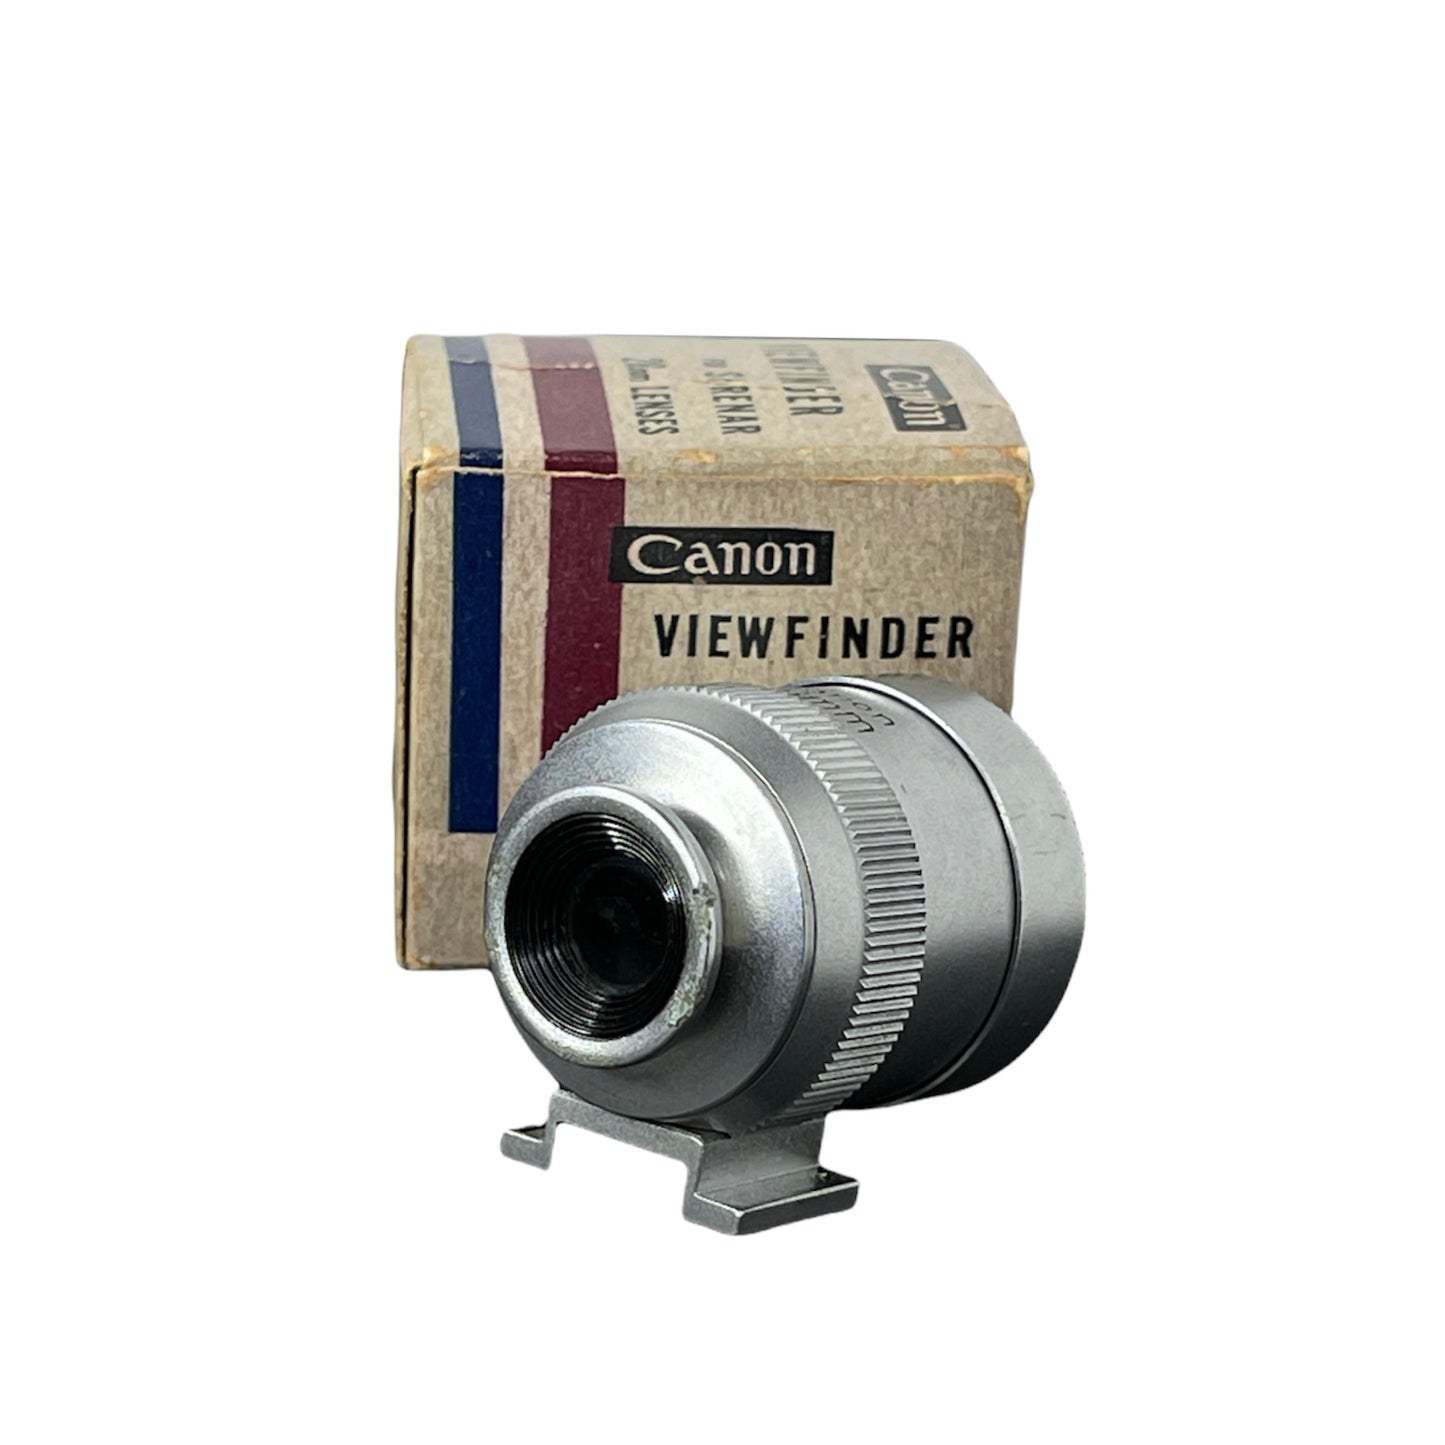 Canon 28mm Viewfinder For Serenar Lens In Box